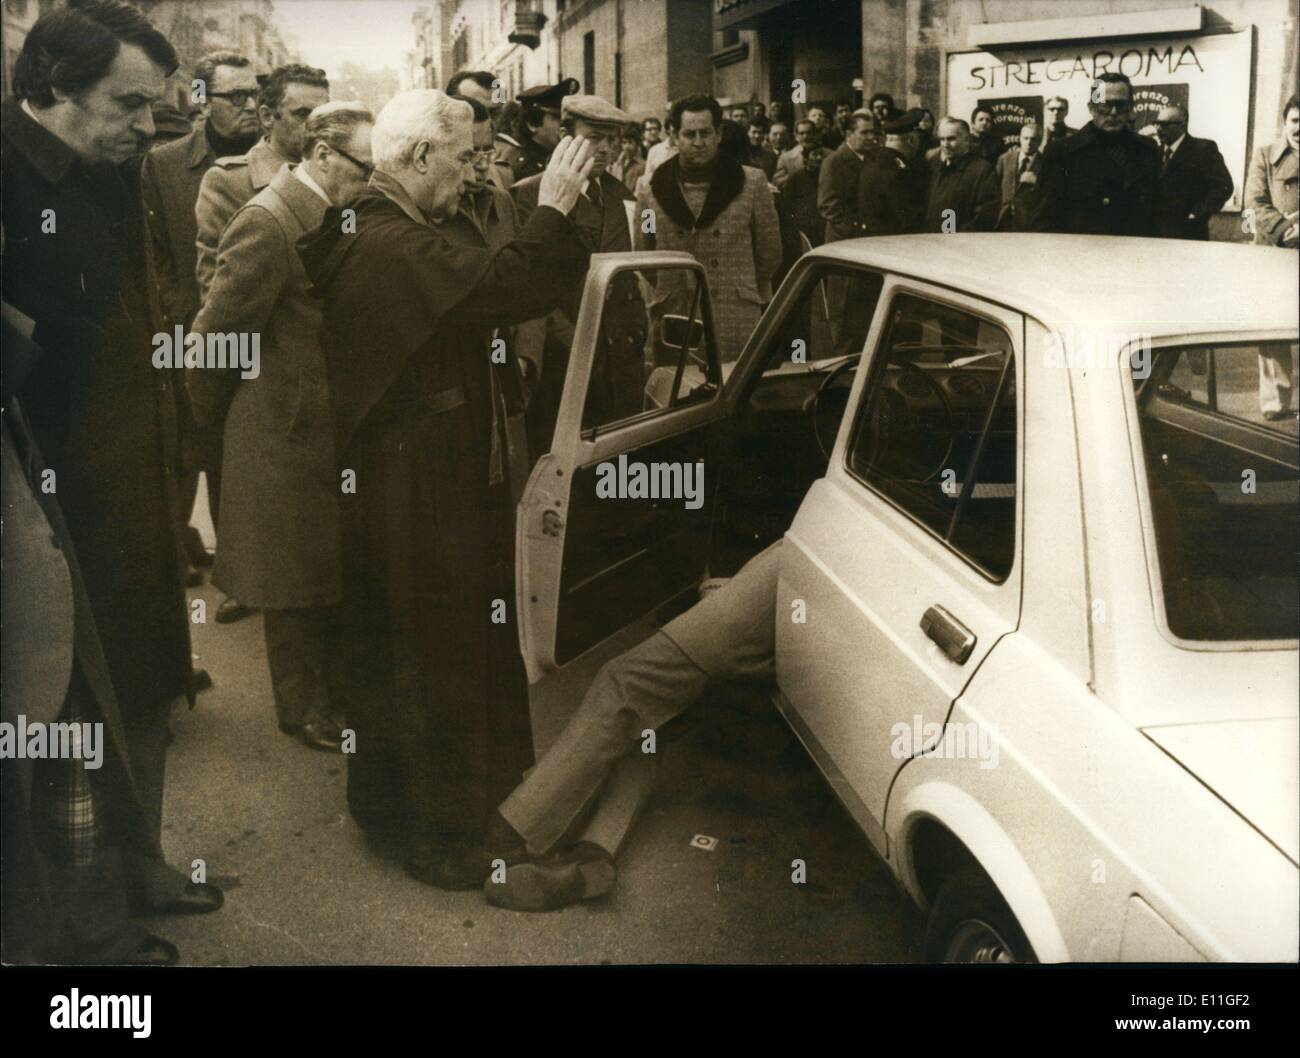 Feb. 02, 1978 - The Red Brigades hit again in Italy. Judge Palma, 63 years old, was killed with a rifle while he was leaving his home in Rome at the steering wheel of his car, headed to his office. Armed Man Walks Through Shrub Filled Area Followed By Other Stock Photo